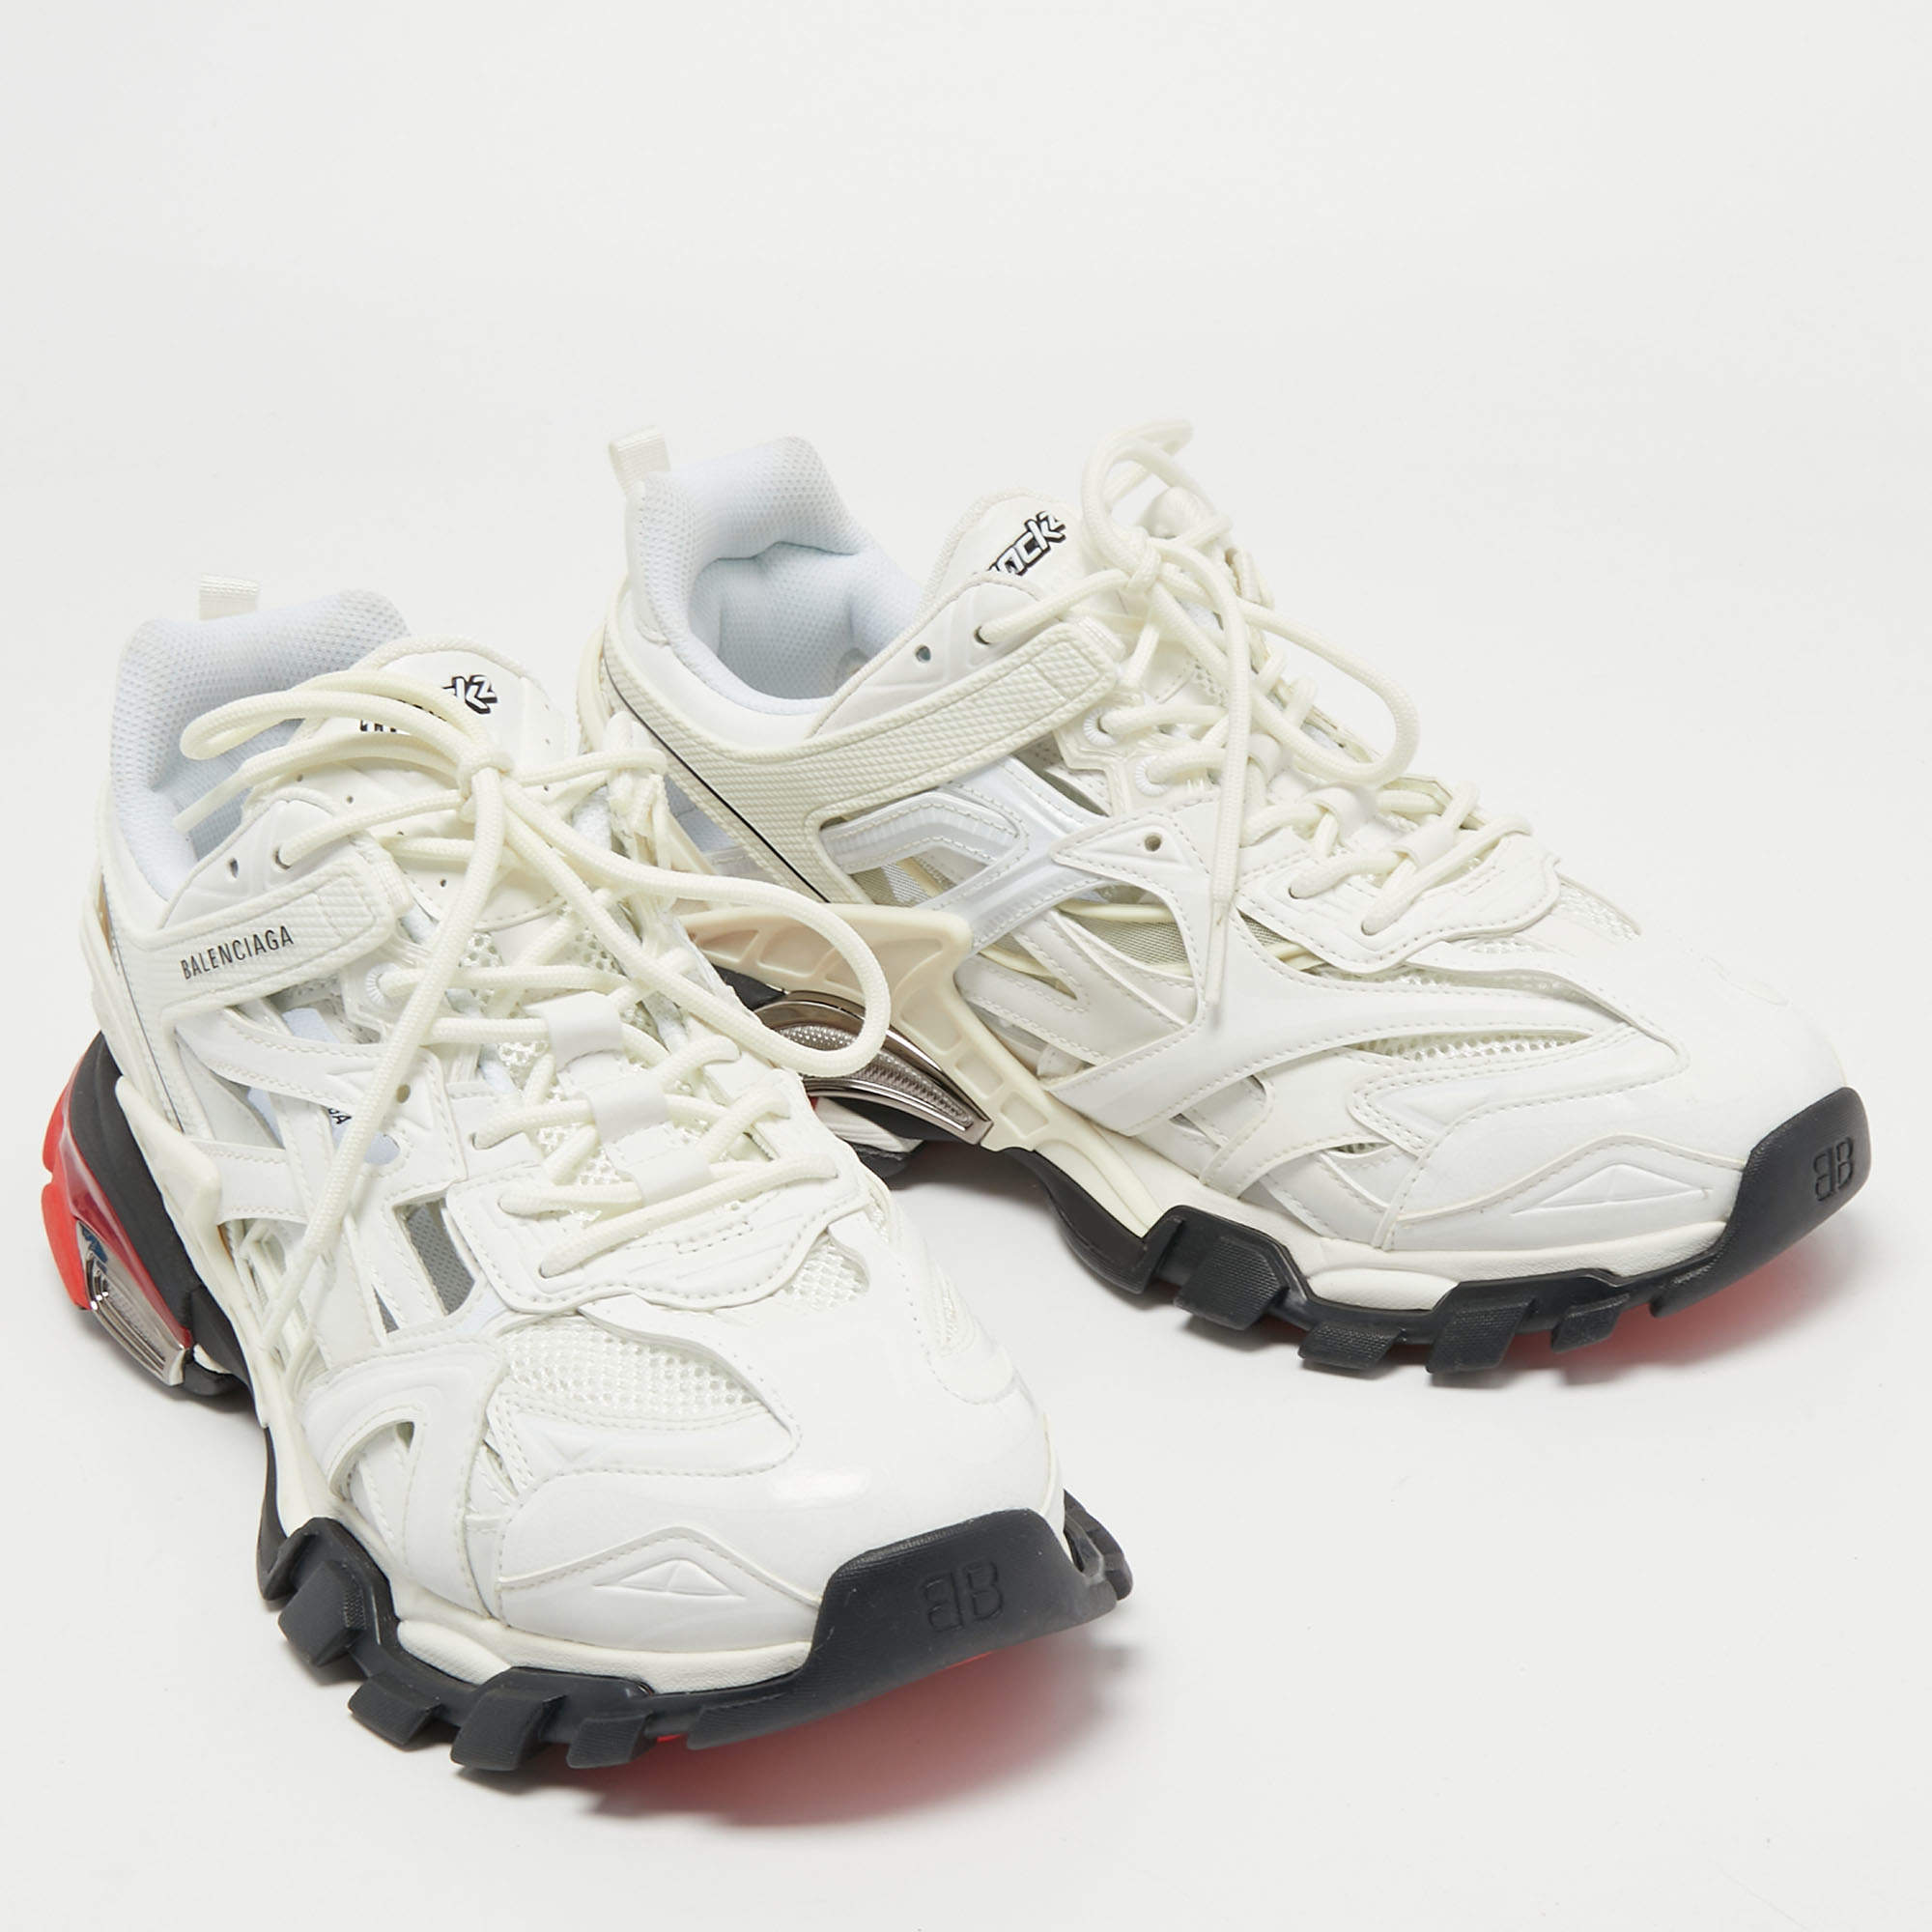 Balenciaga White Leather and Mesh Track 2 Sneakers Size 45 